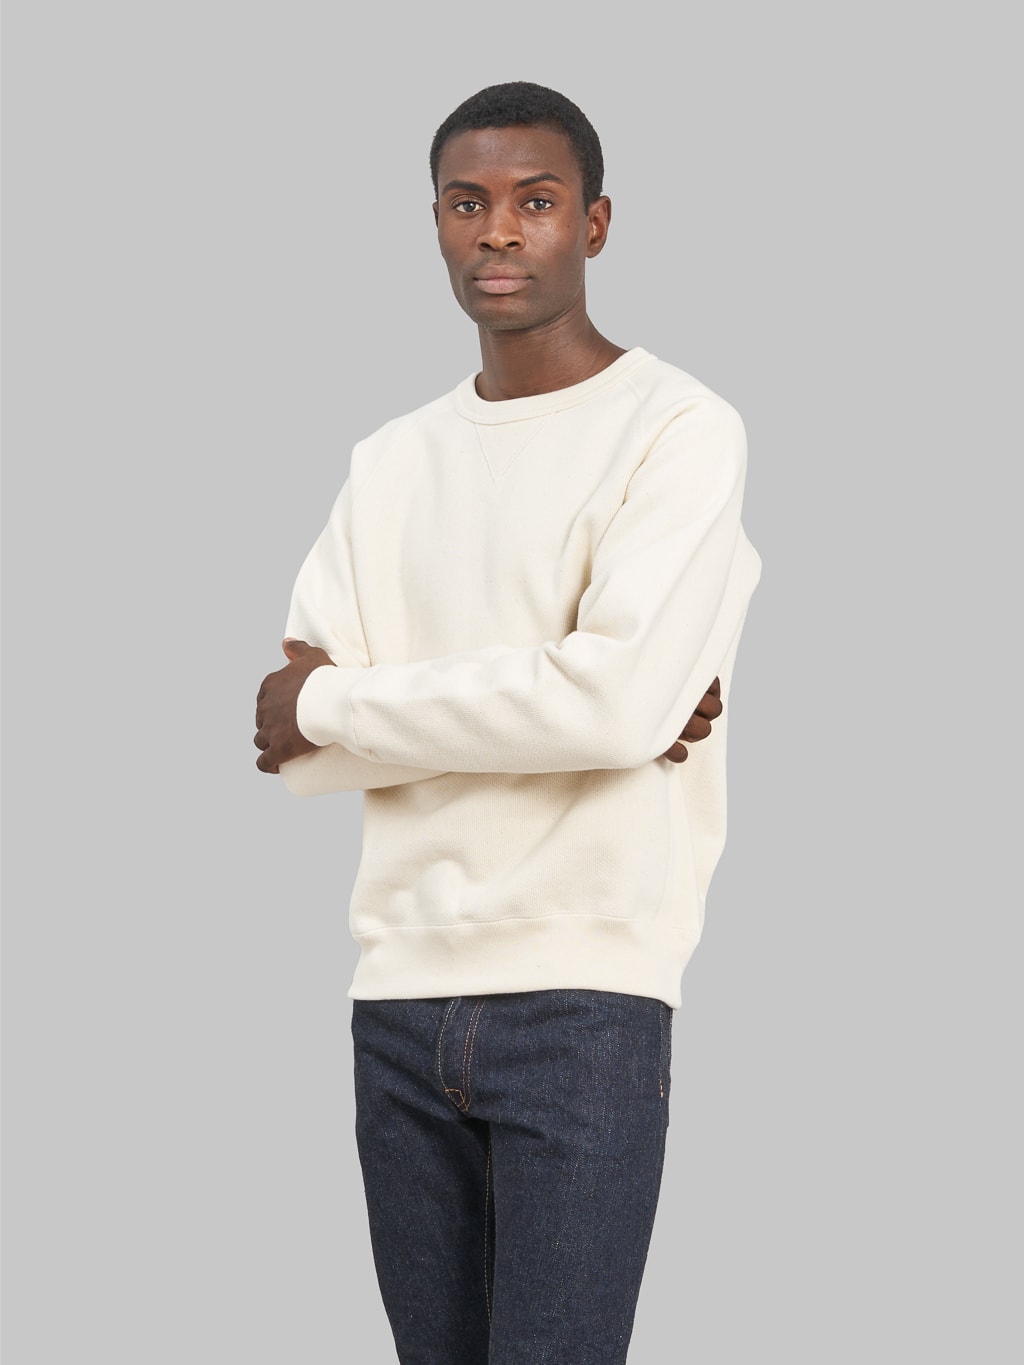 Sweatshirt in Cream made of Cotton French Terry